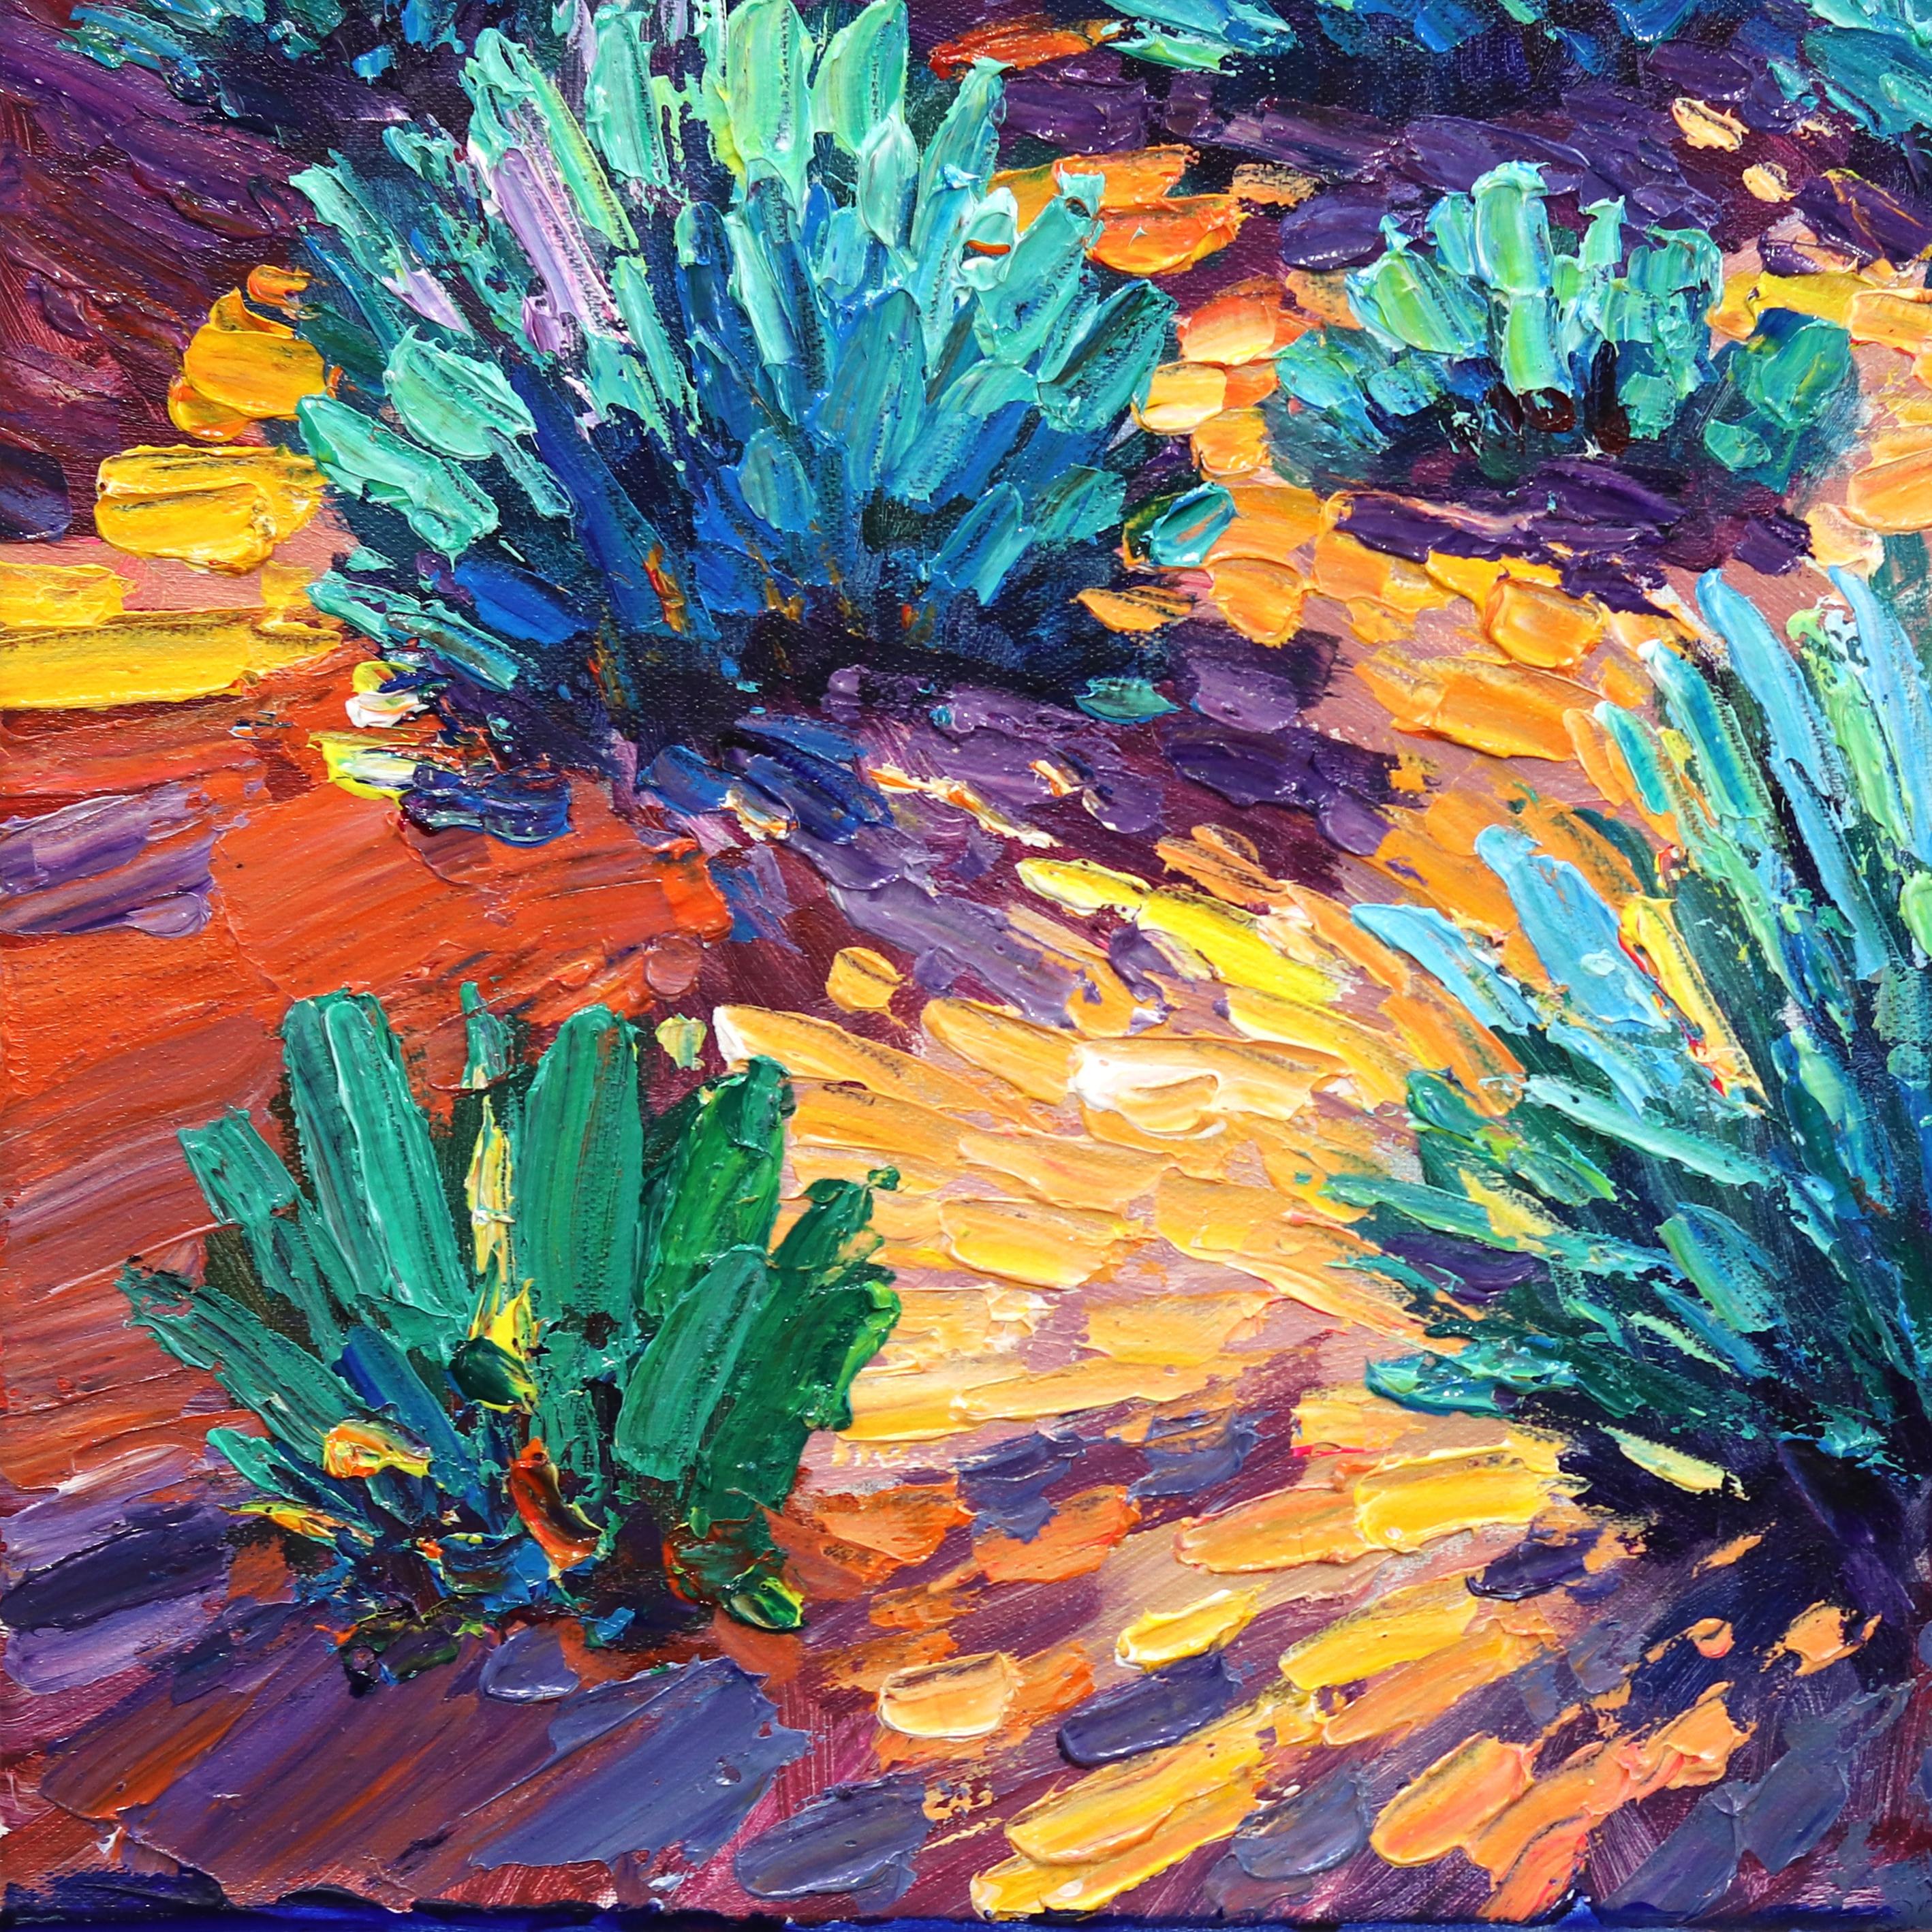 A Spark in the Sky - Vibrant Textural Mountain Desert Landscape Oil Painting 1